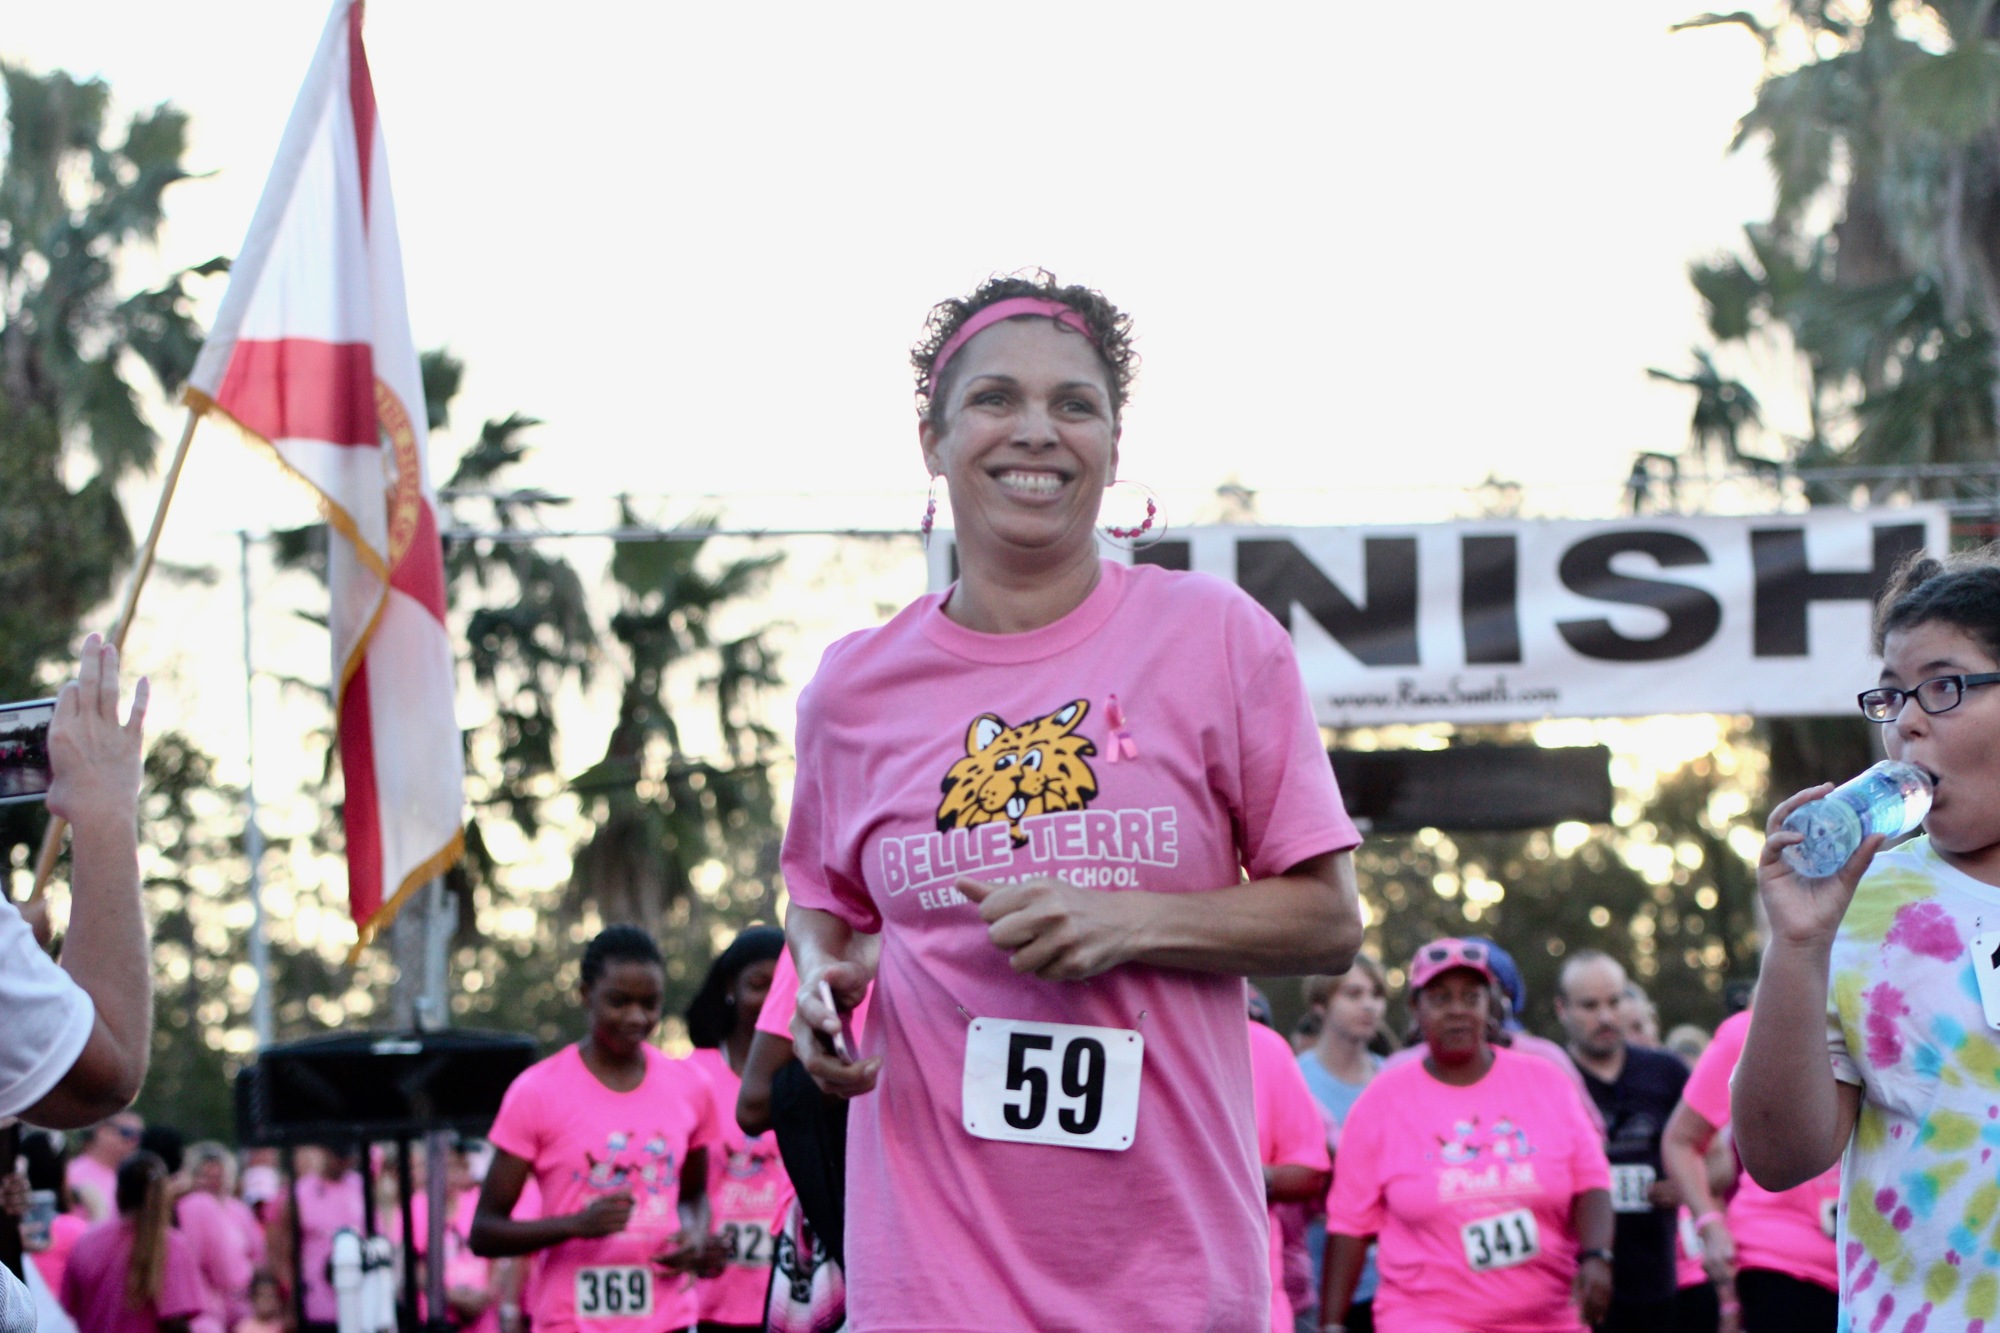 Pink 5K participant Priscilla Campbell smiles as she starts the race at Florida Hospital Flagler. Photo by Ray Boone